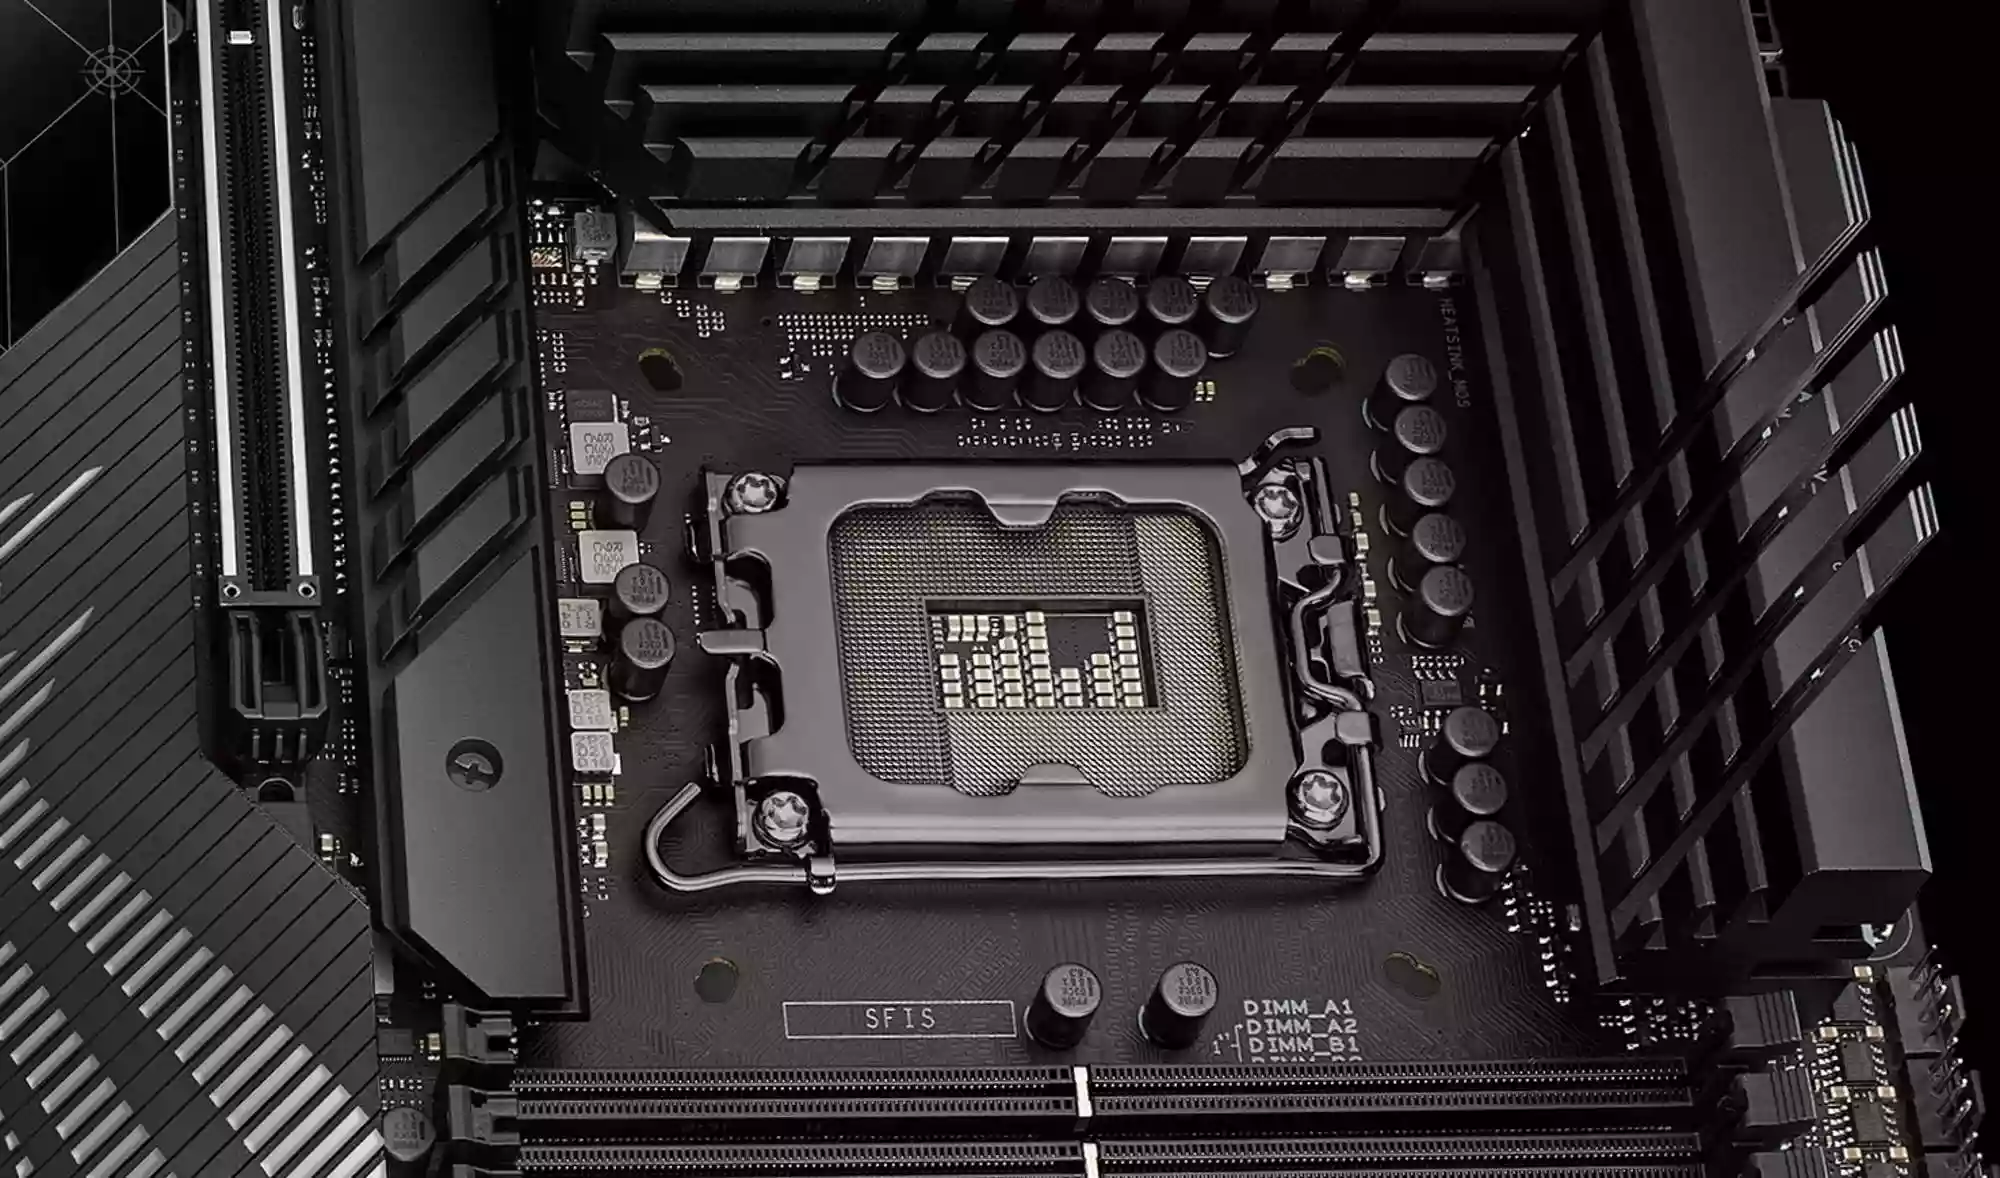 The AM5 socket on the ROG Maximus Z790 Hero motherboard